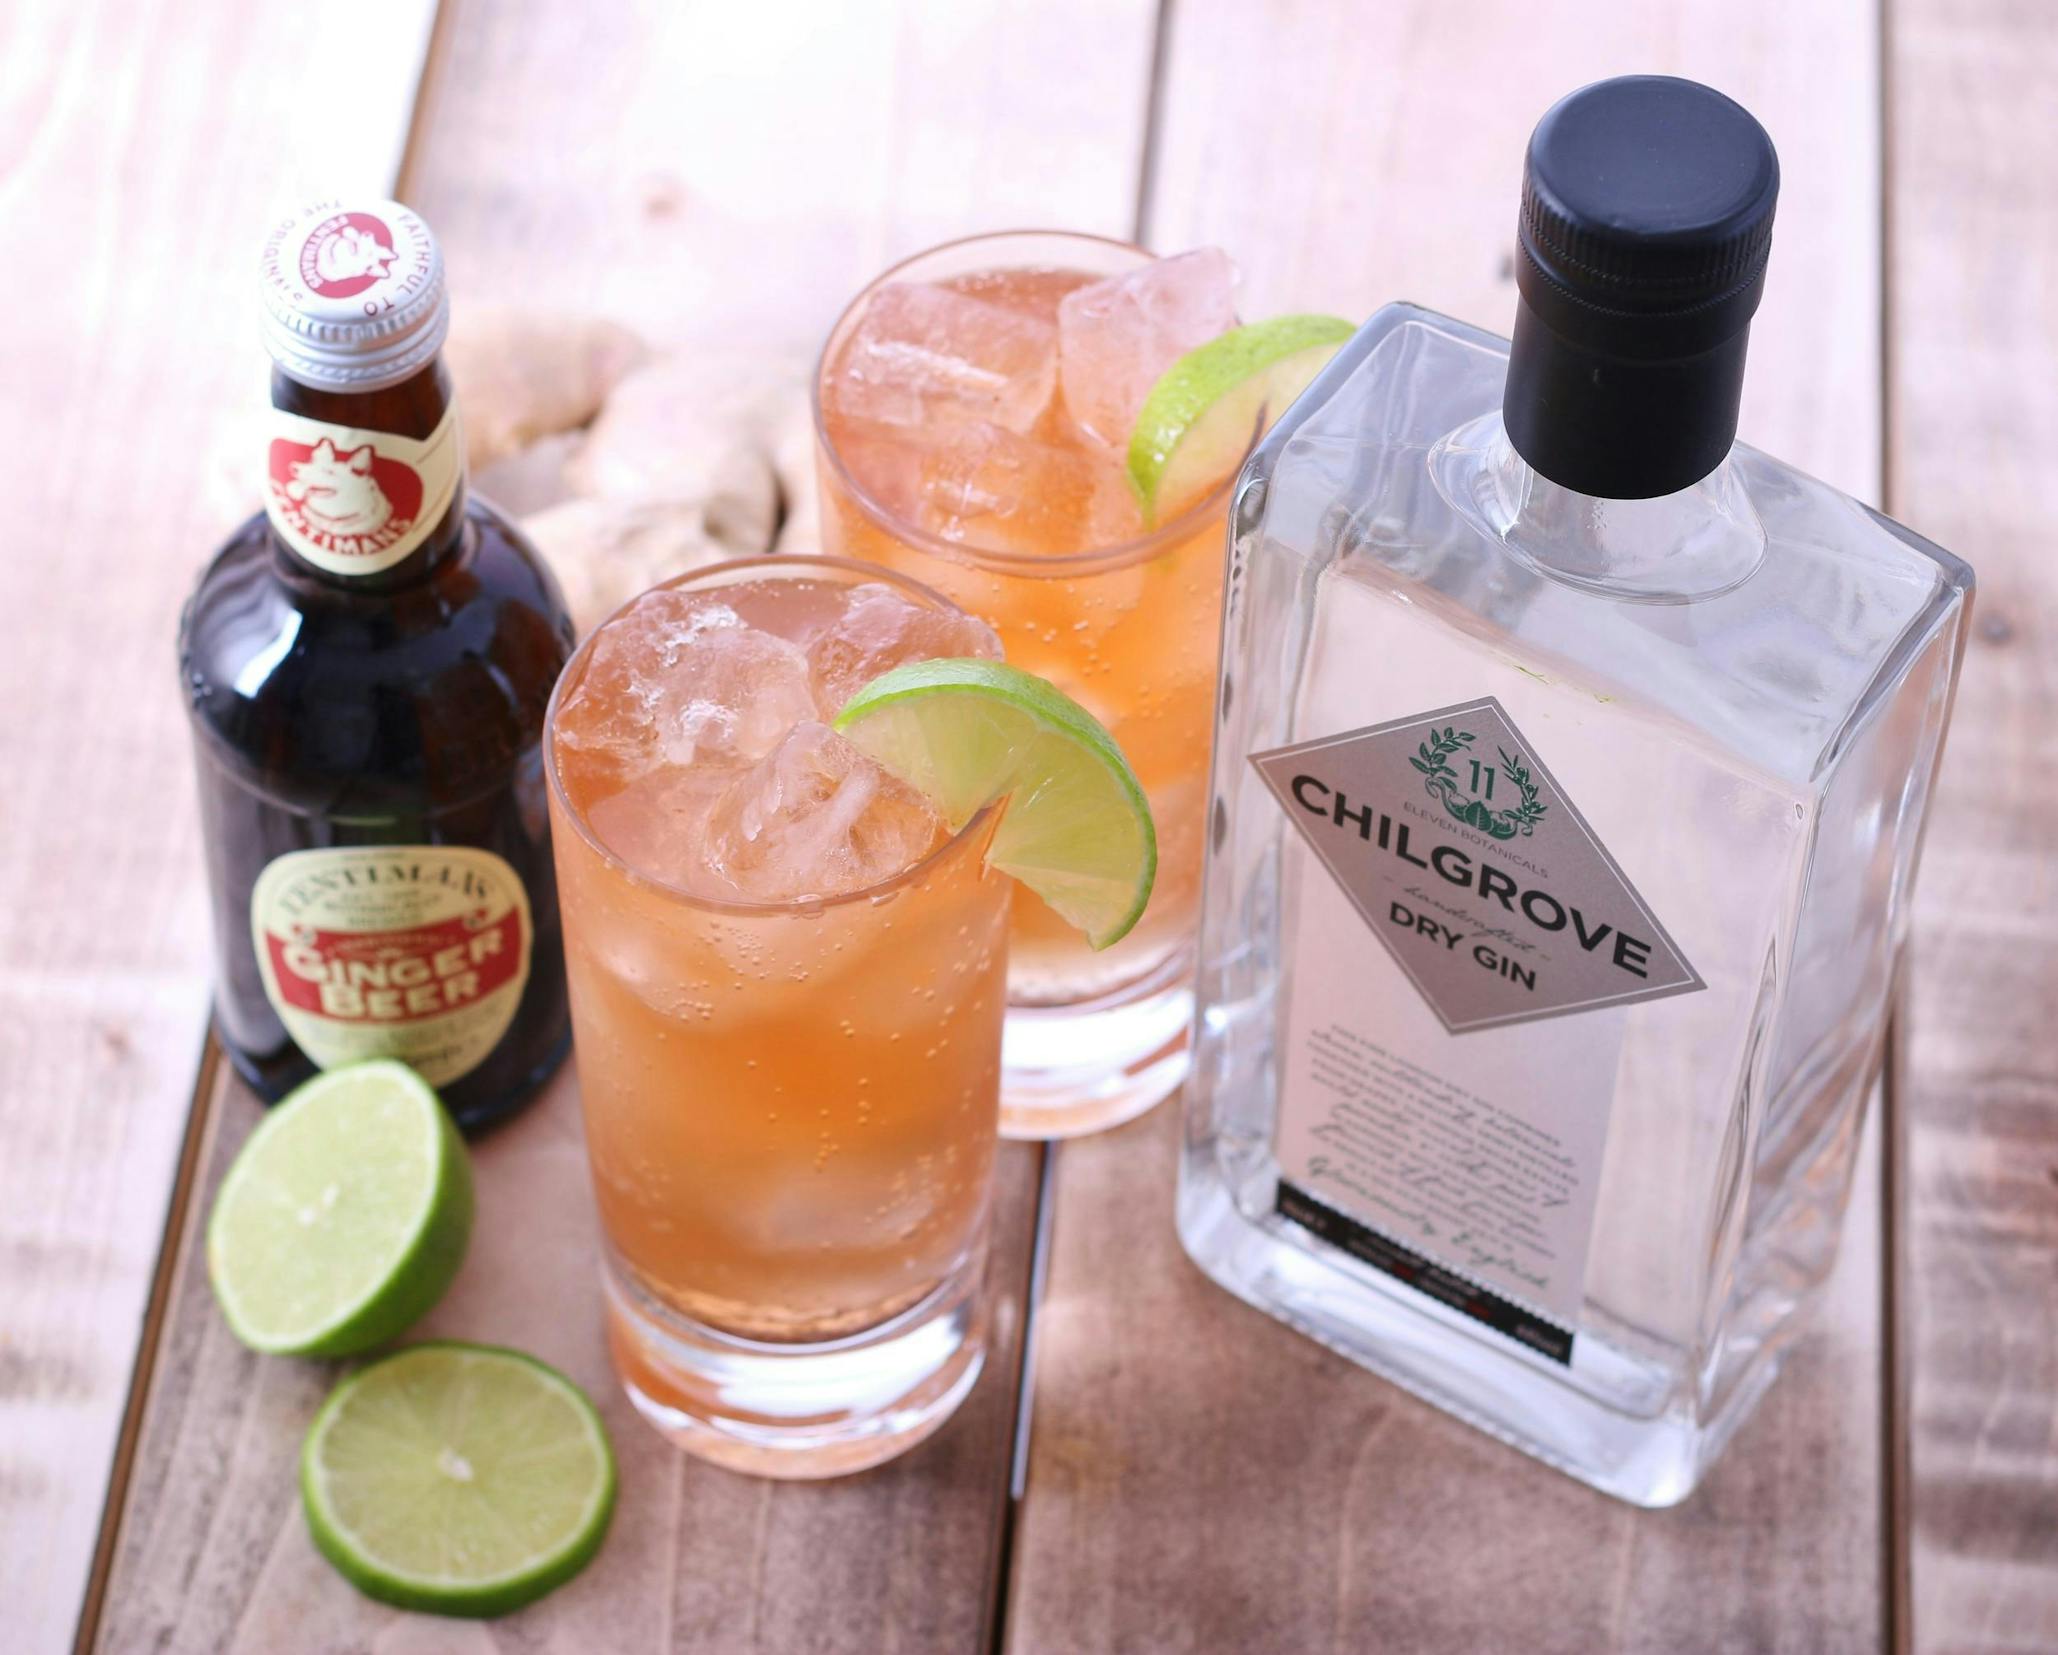 3 crafty questions for Fentimans Botanically Brewed Beverages and Chilgrove Dry Gin for their Bright n' Breezy Cocktail